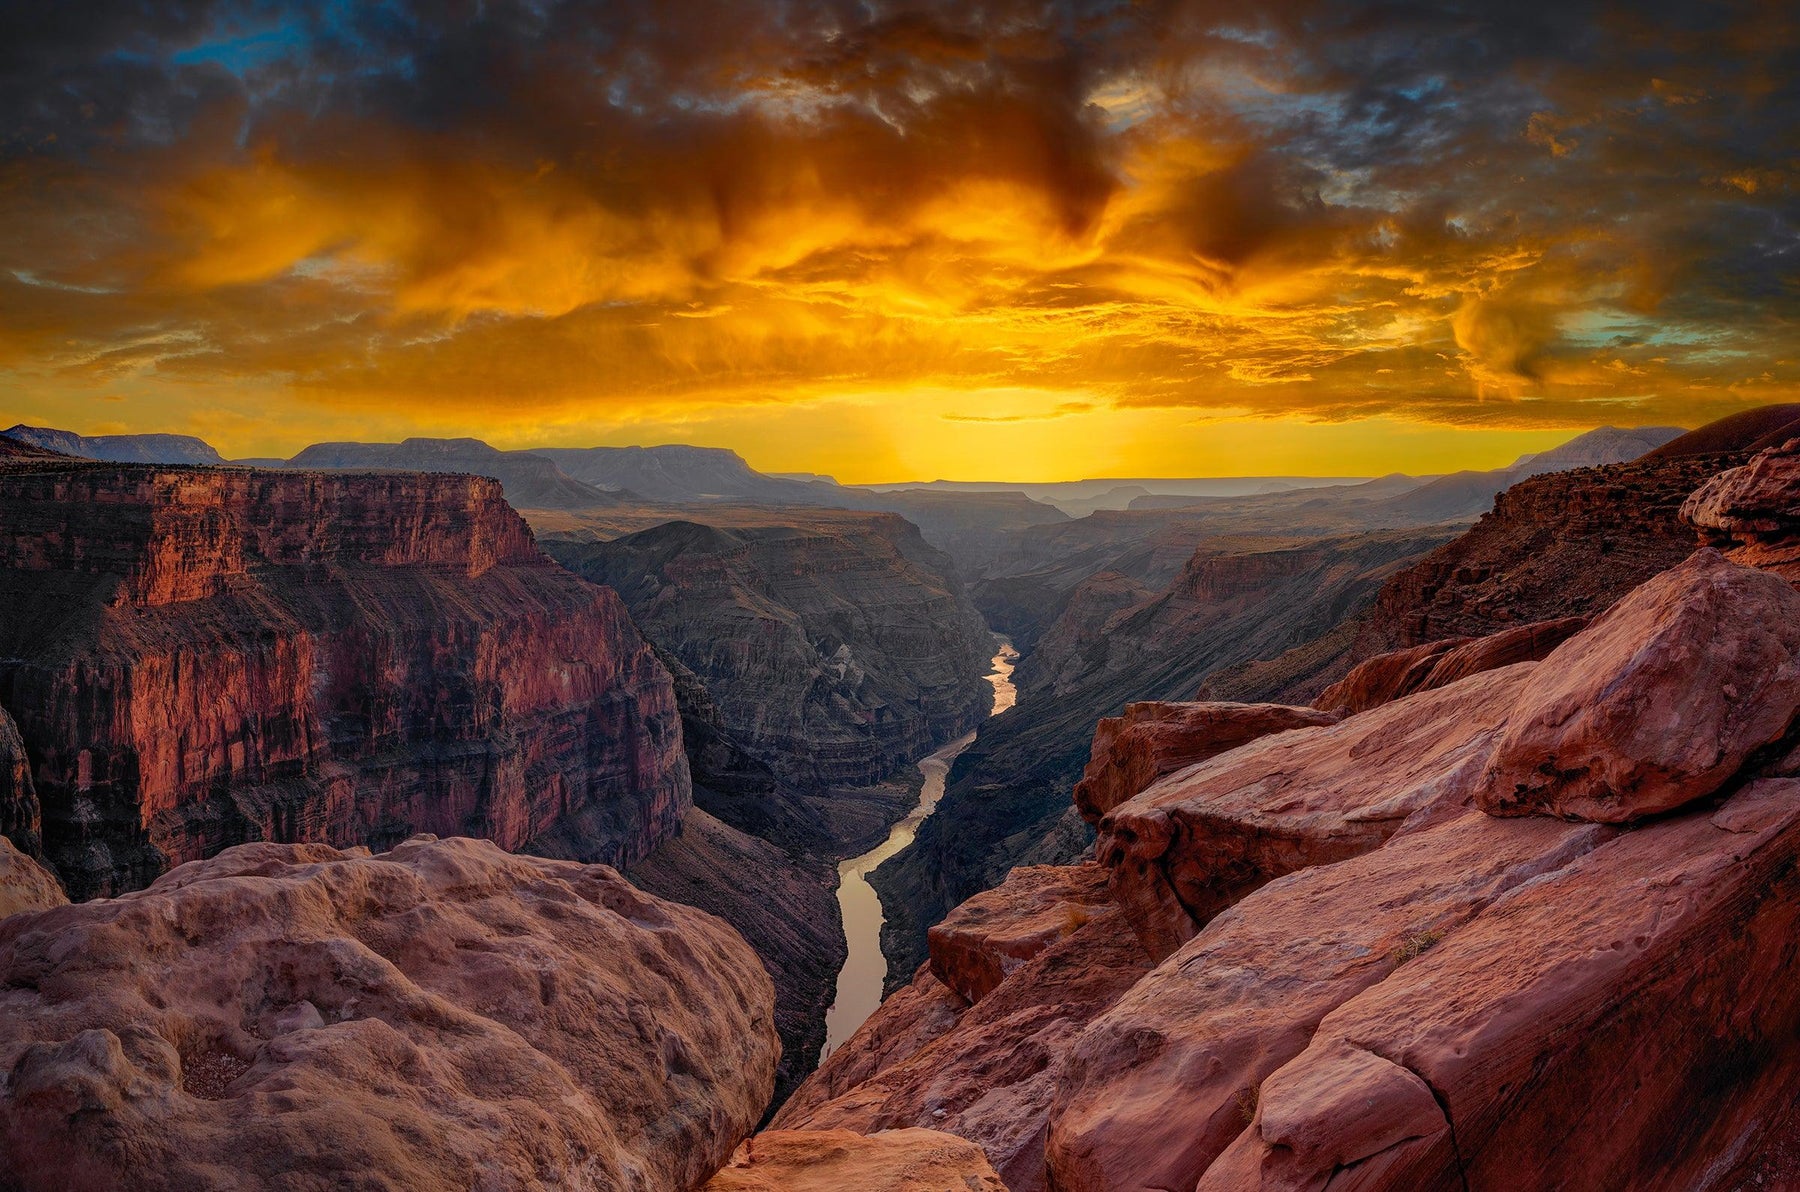 Photograph of Rocky cliff of the Grand Canyon overlooking the Colorado River below at sunset | LIK Fine Art